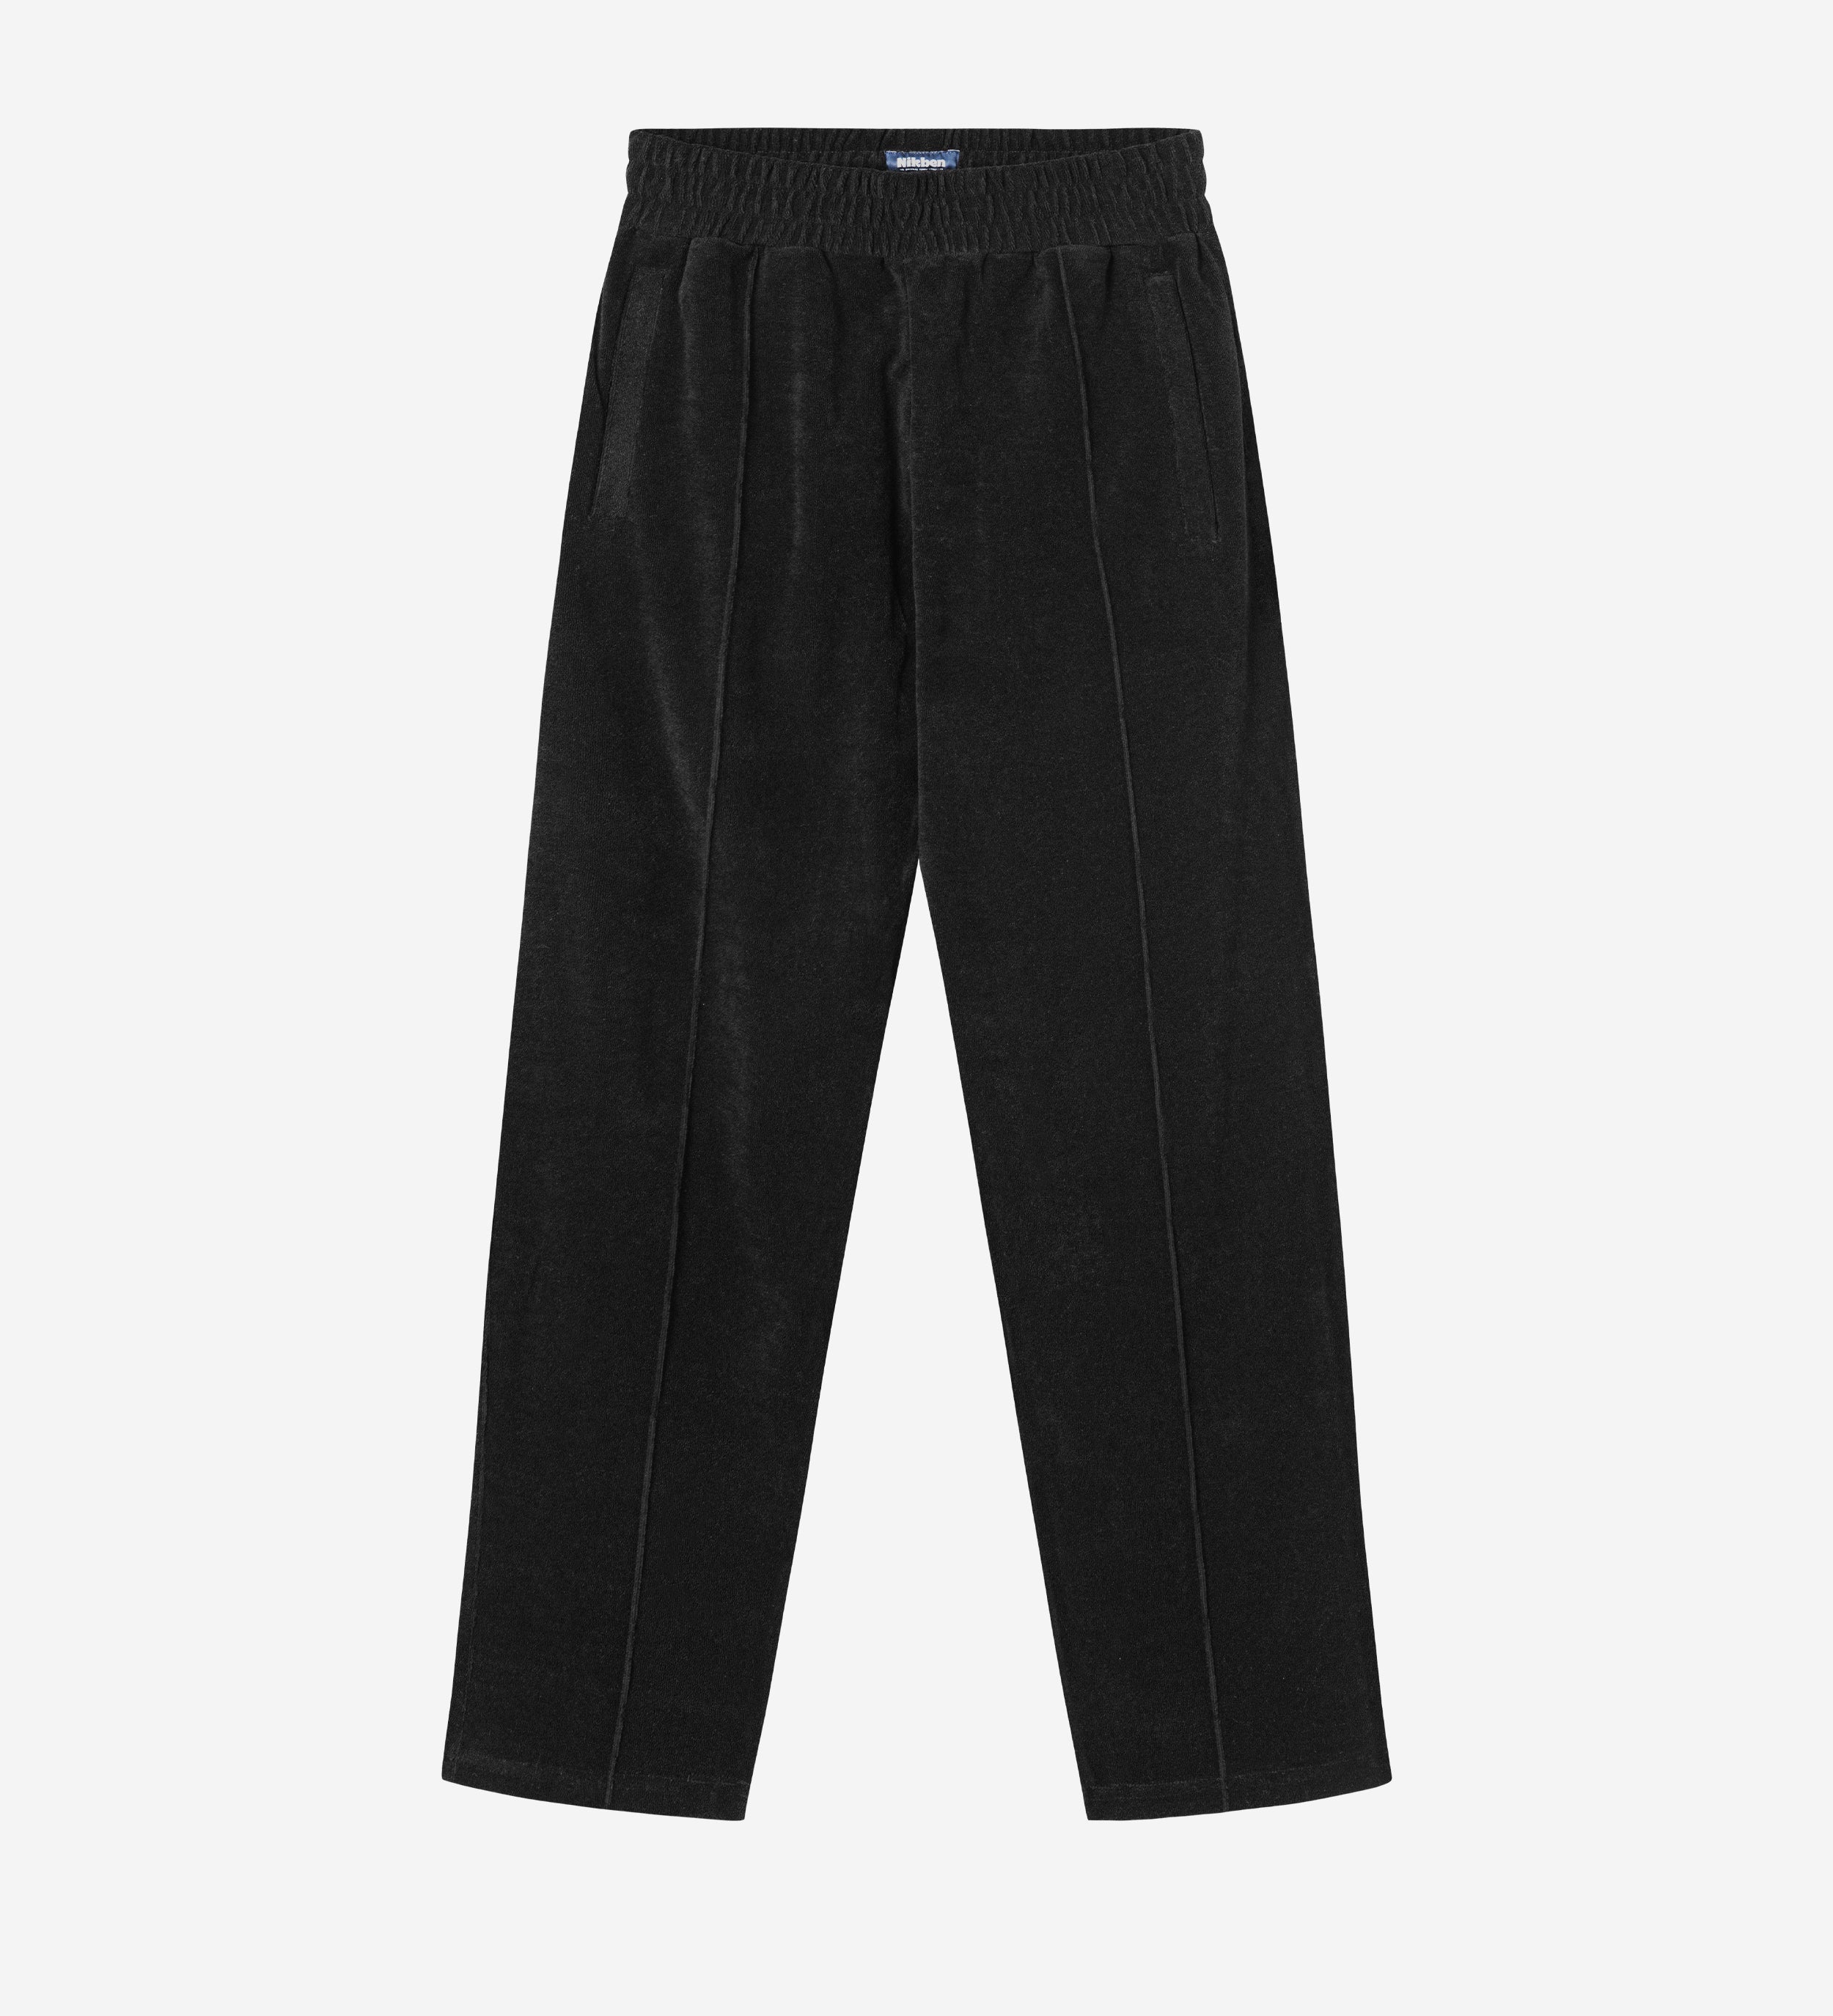 Black pants in terry toweling fabric